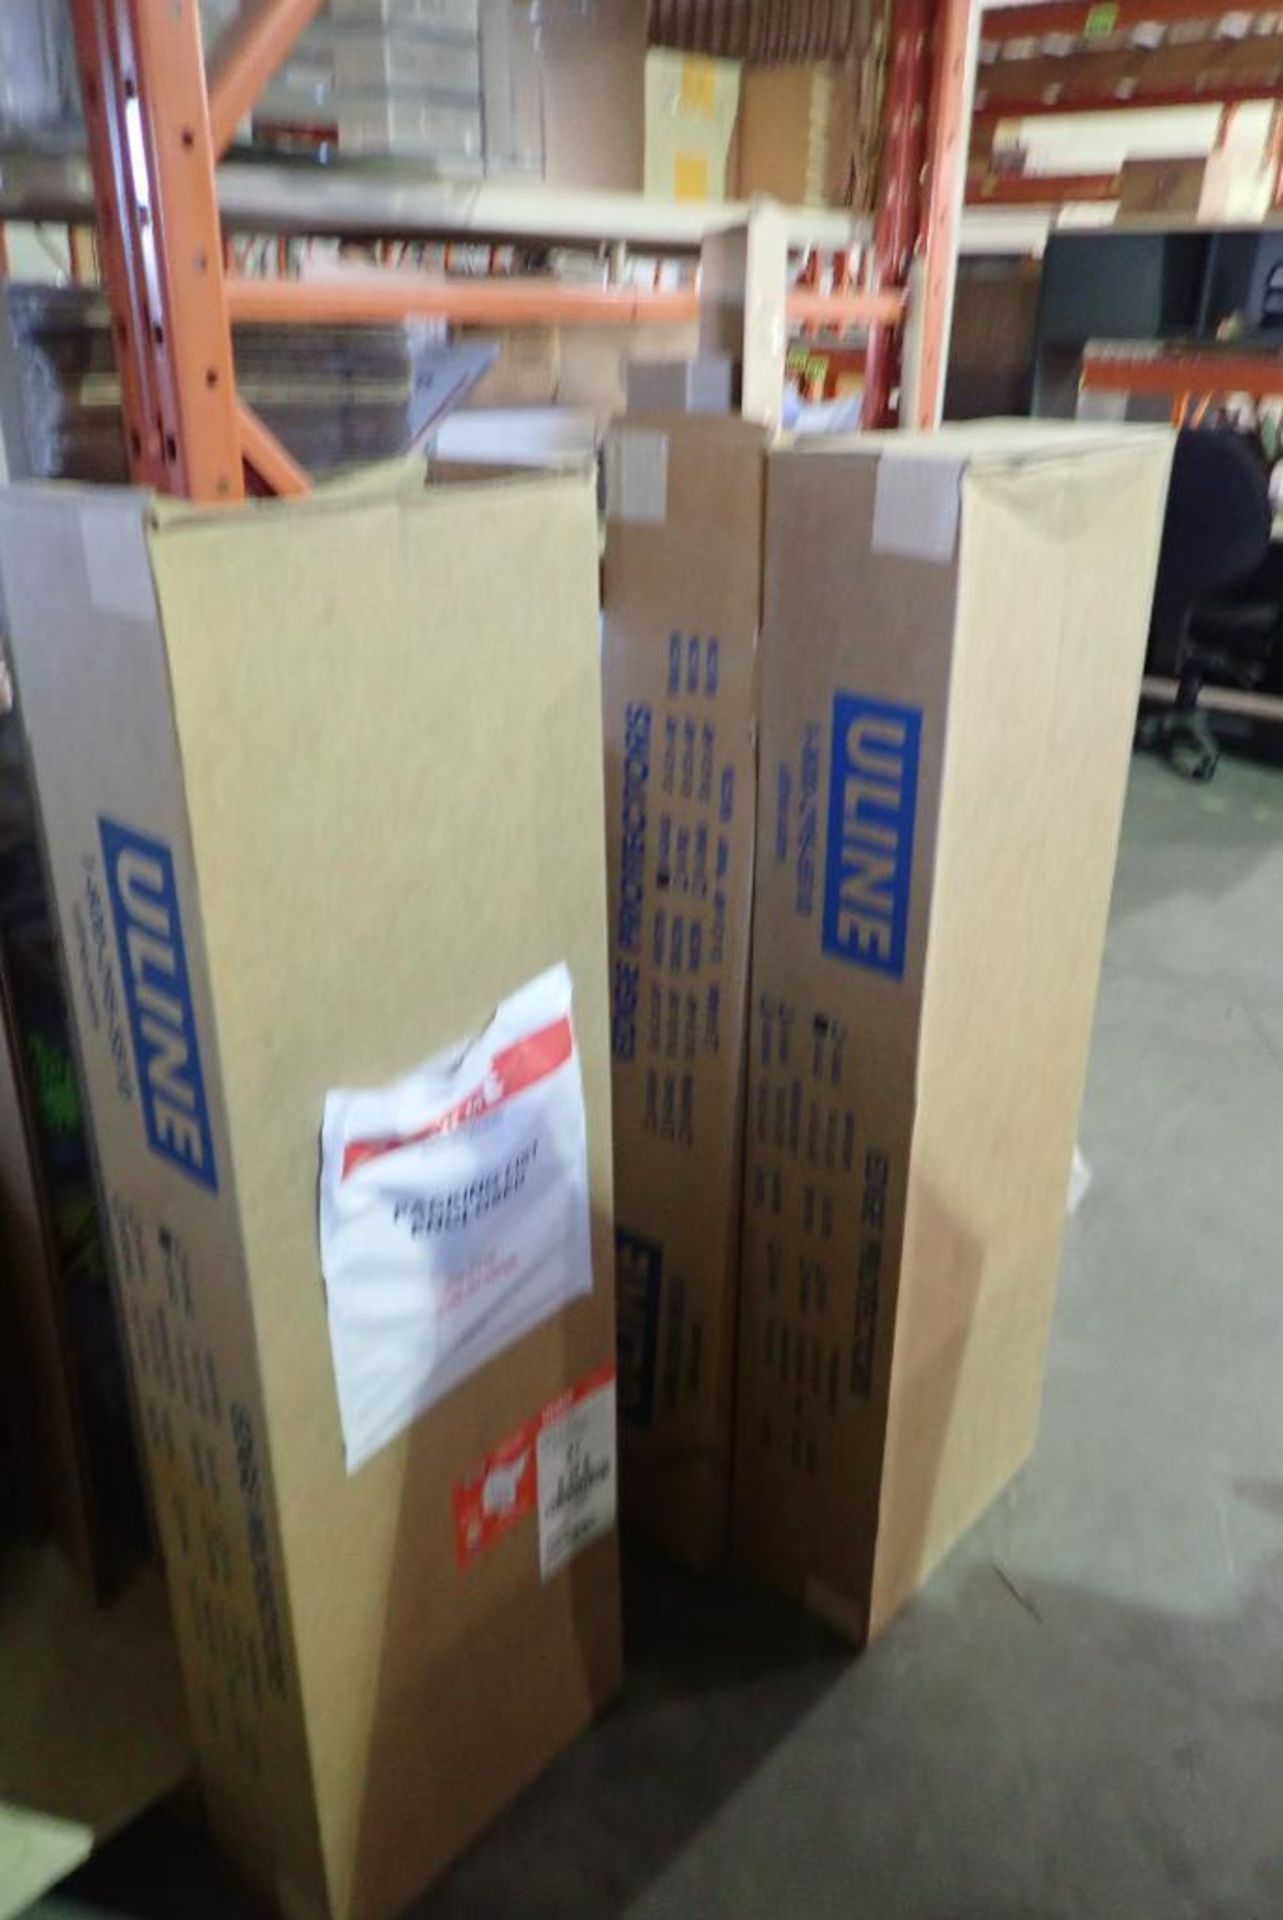 Lot of Asst. Shipping Supplies, Shipping Tubes, Foam Inserts, Cabinets, etc. - Image 3 of 5